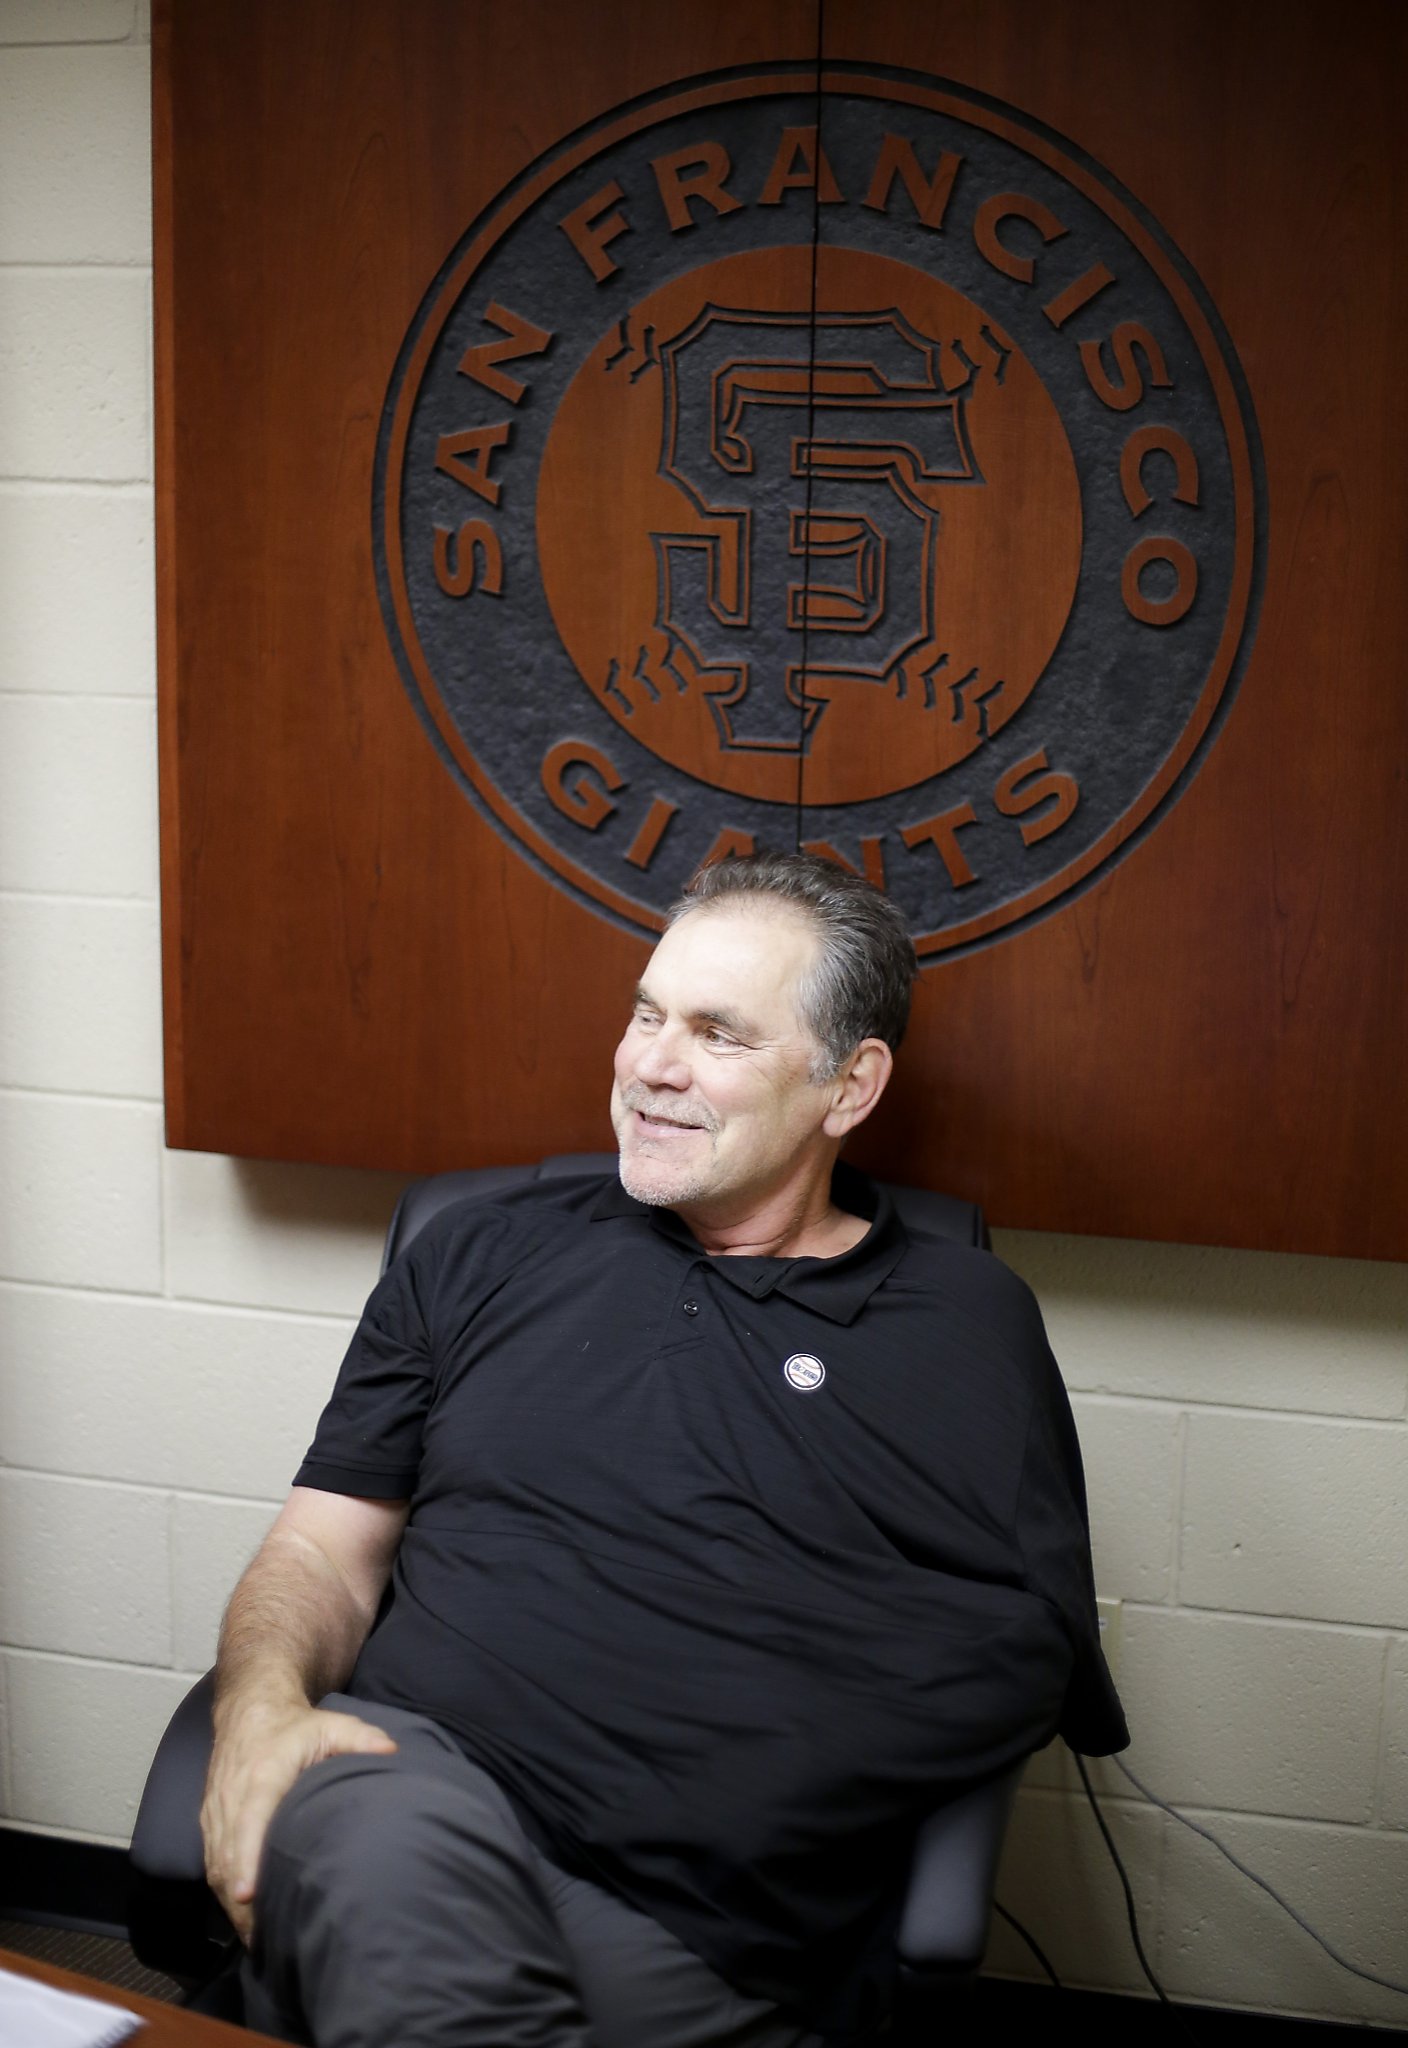 Giants manager Bruce Bochy undergoes arm surgery